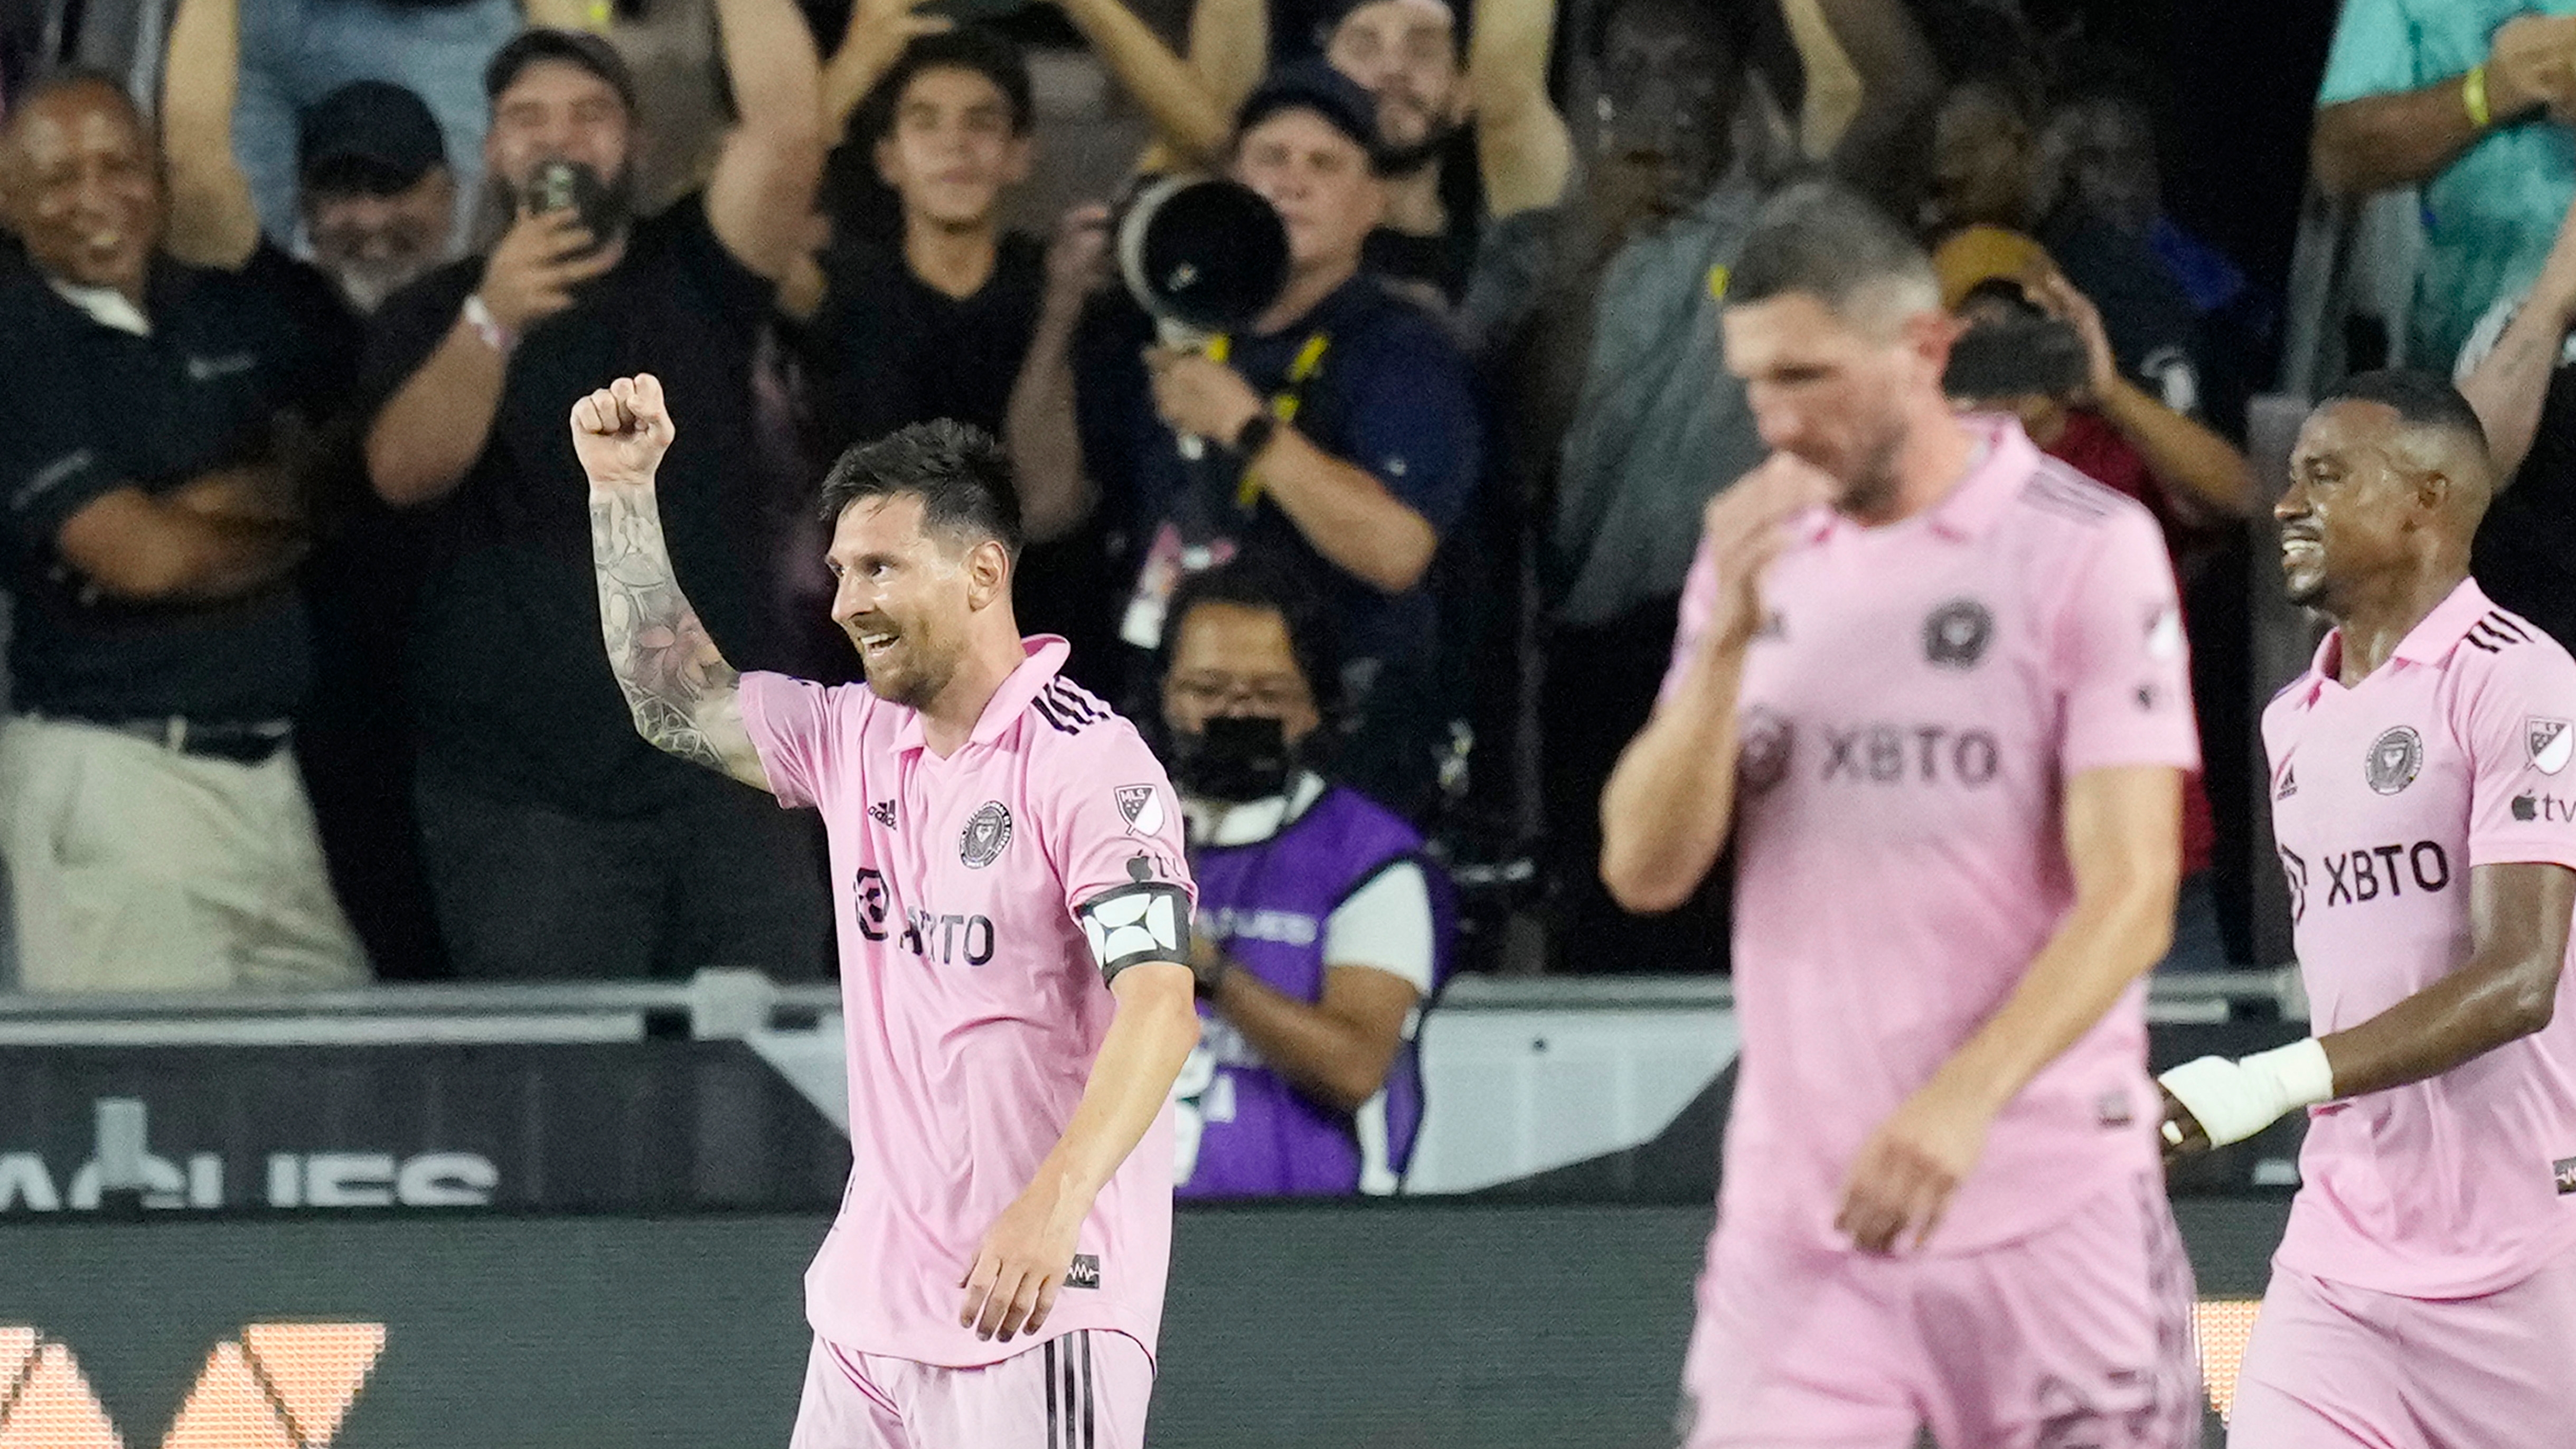 Messi Miami debut delivers in the ratings on Univision - Sports